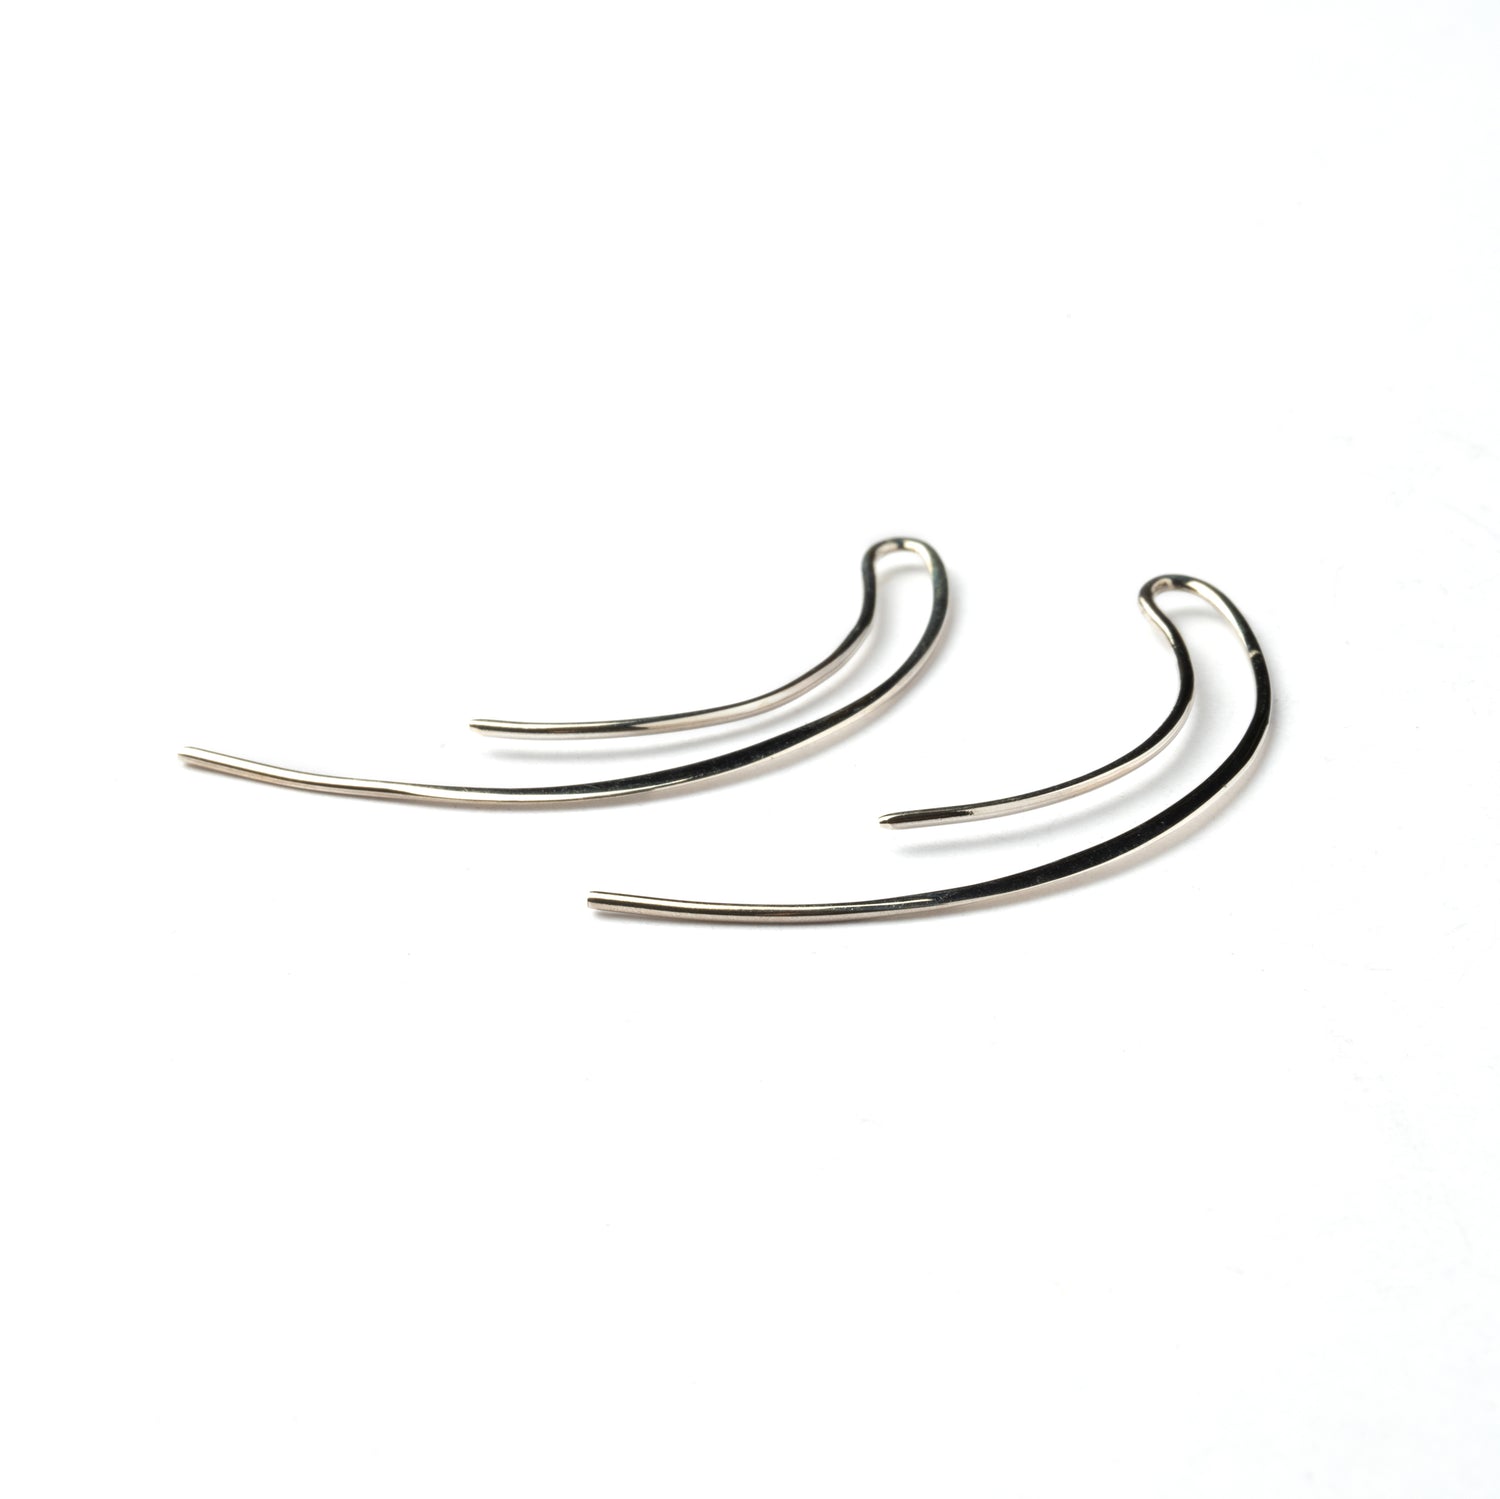 Silver Bent Wire Earrings right side view